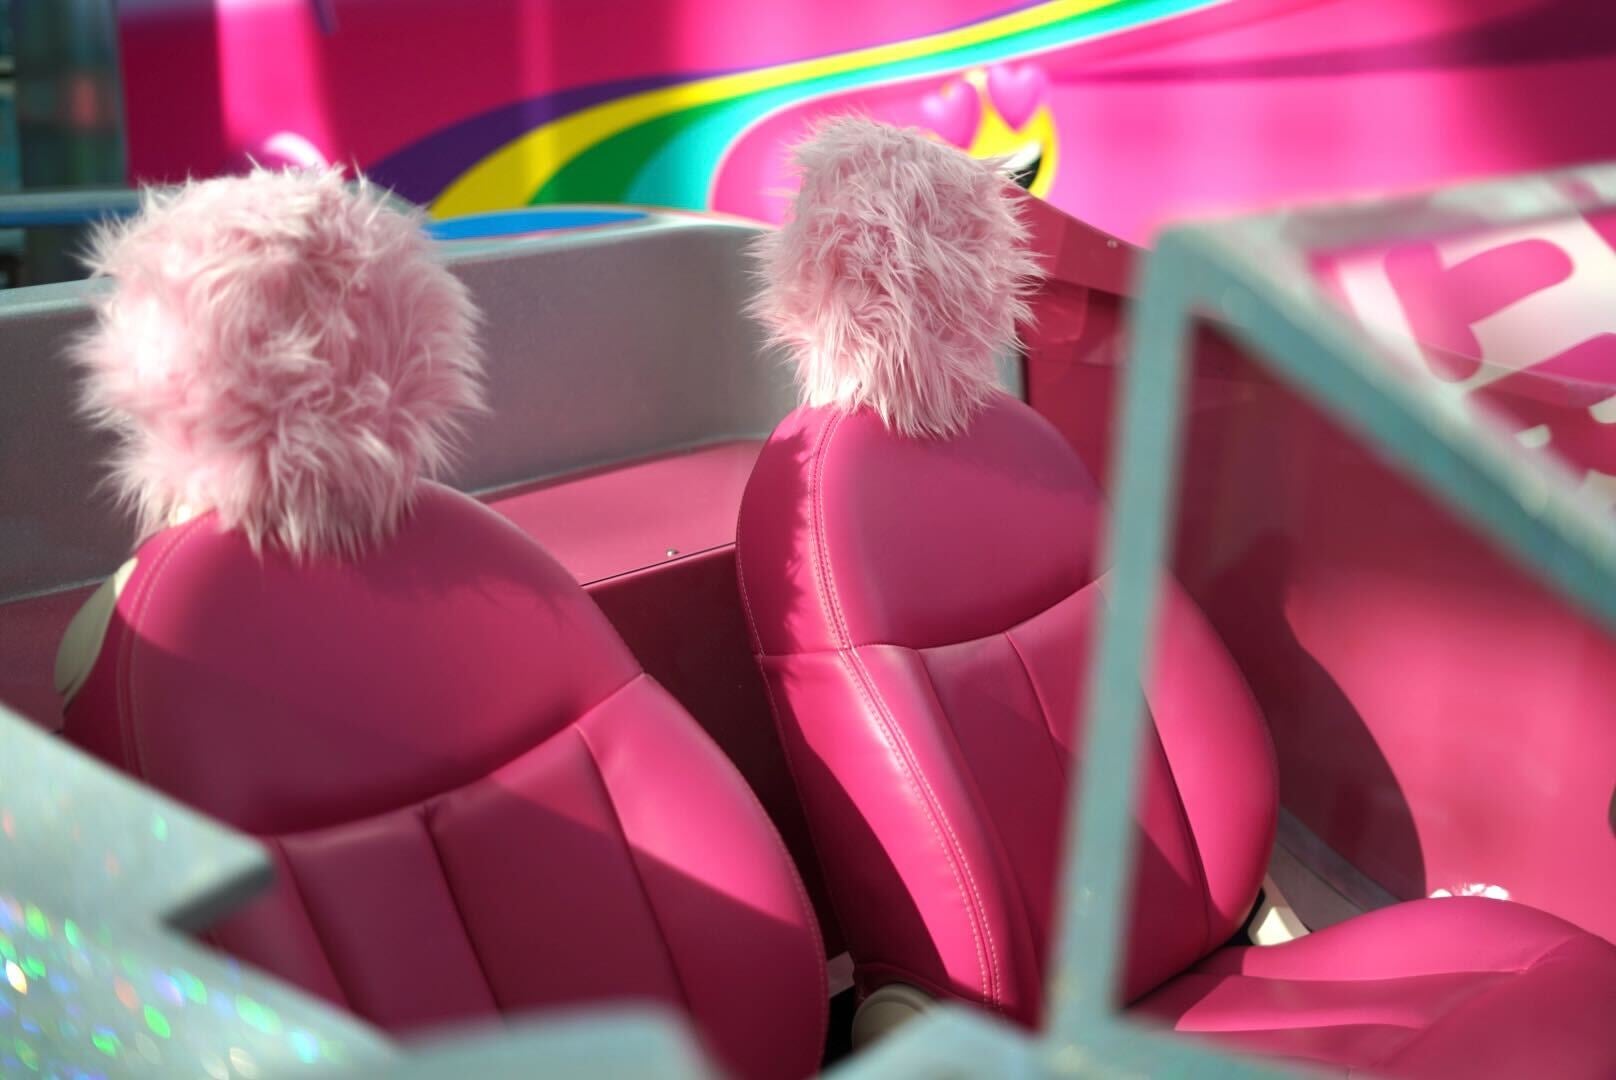 Barbie’s New Electric Sports Car Is Totally Radical And I Want One